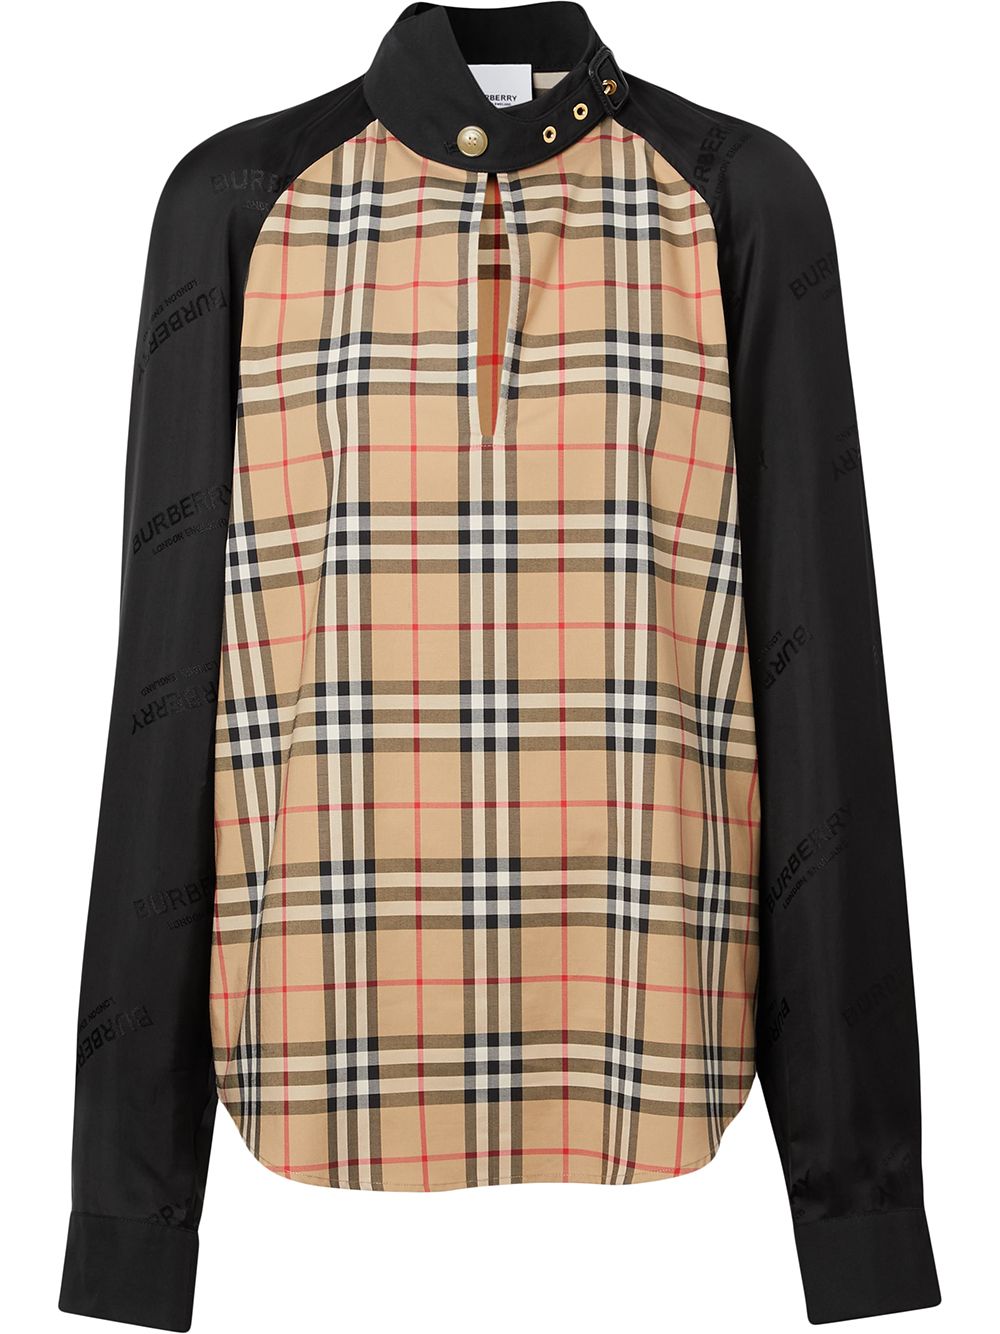 Burberry Vintage Check Panelled Blouse - Farfetch